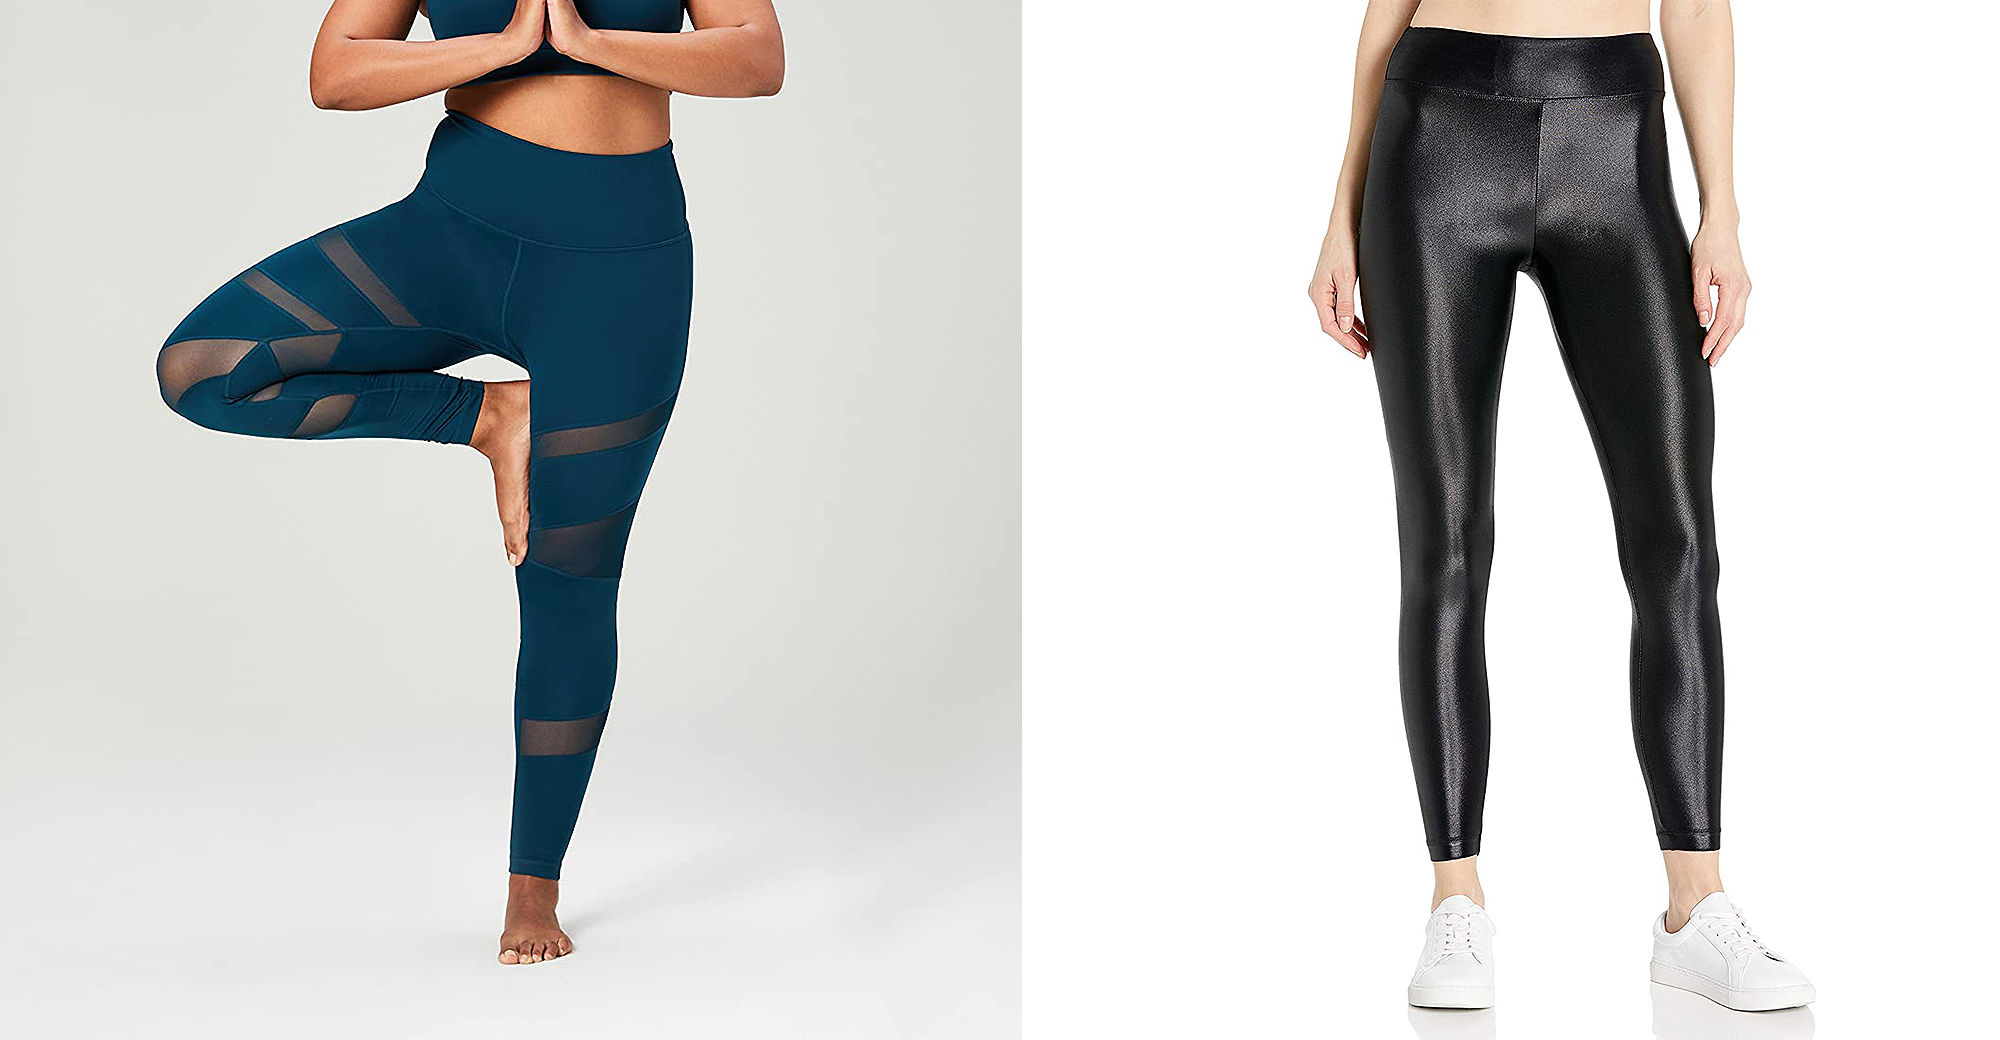 Tights or leggings in the office: A Fashion Faux Pas